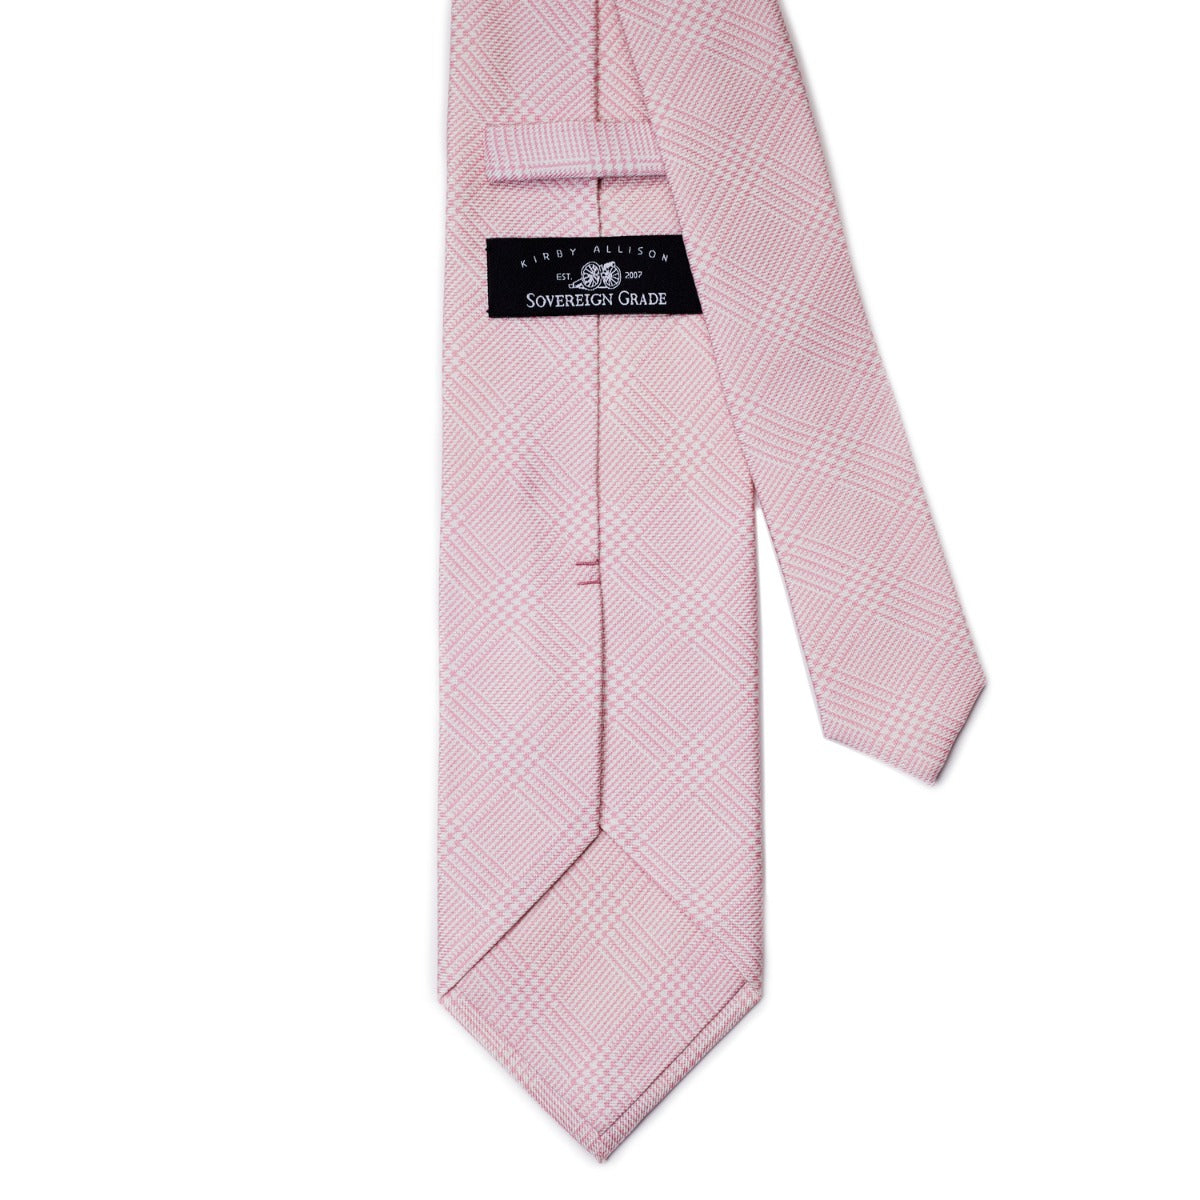 A KirbyAllison.com Sovereign Grade Pink Prince of Wales Check, 150 CM necktie on a white background.